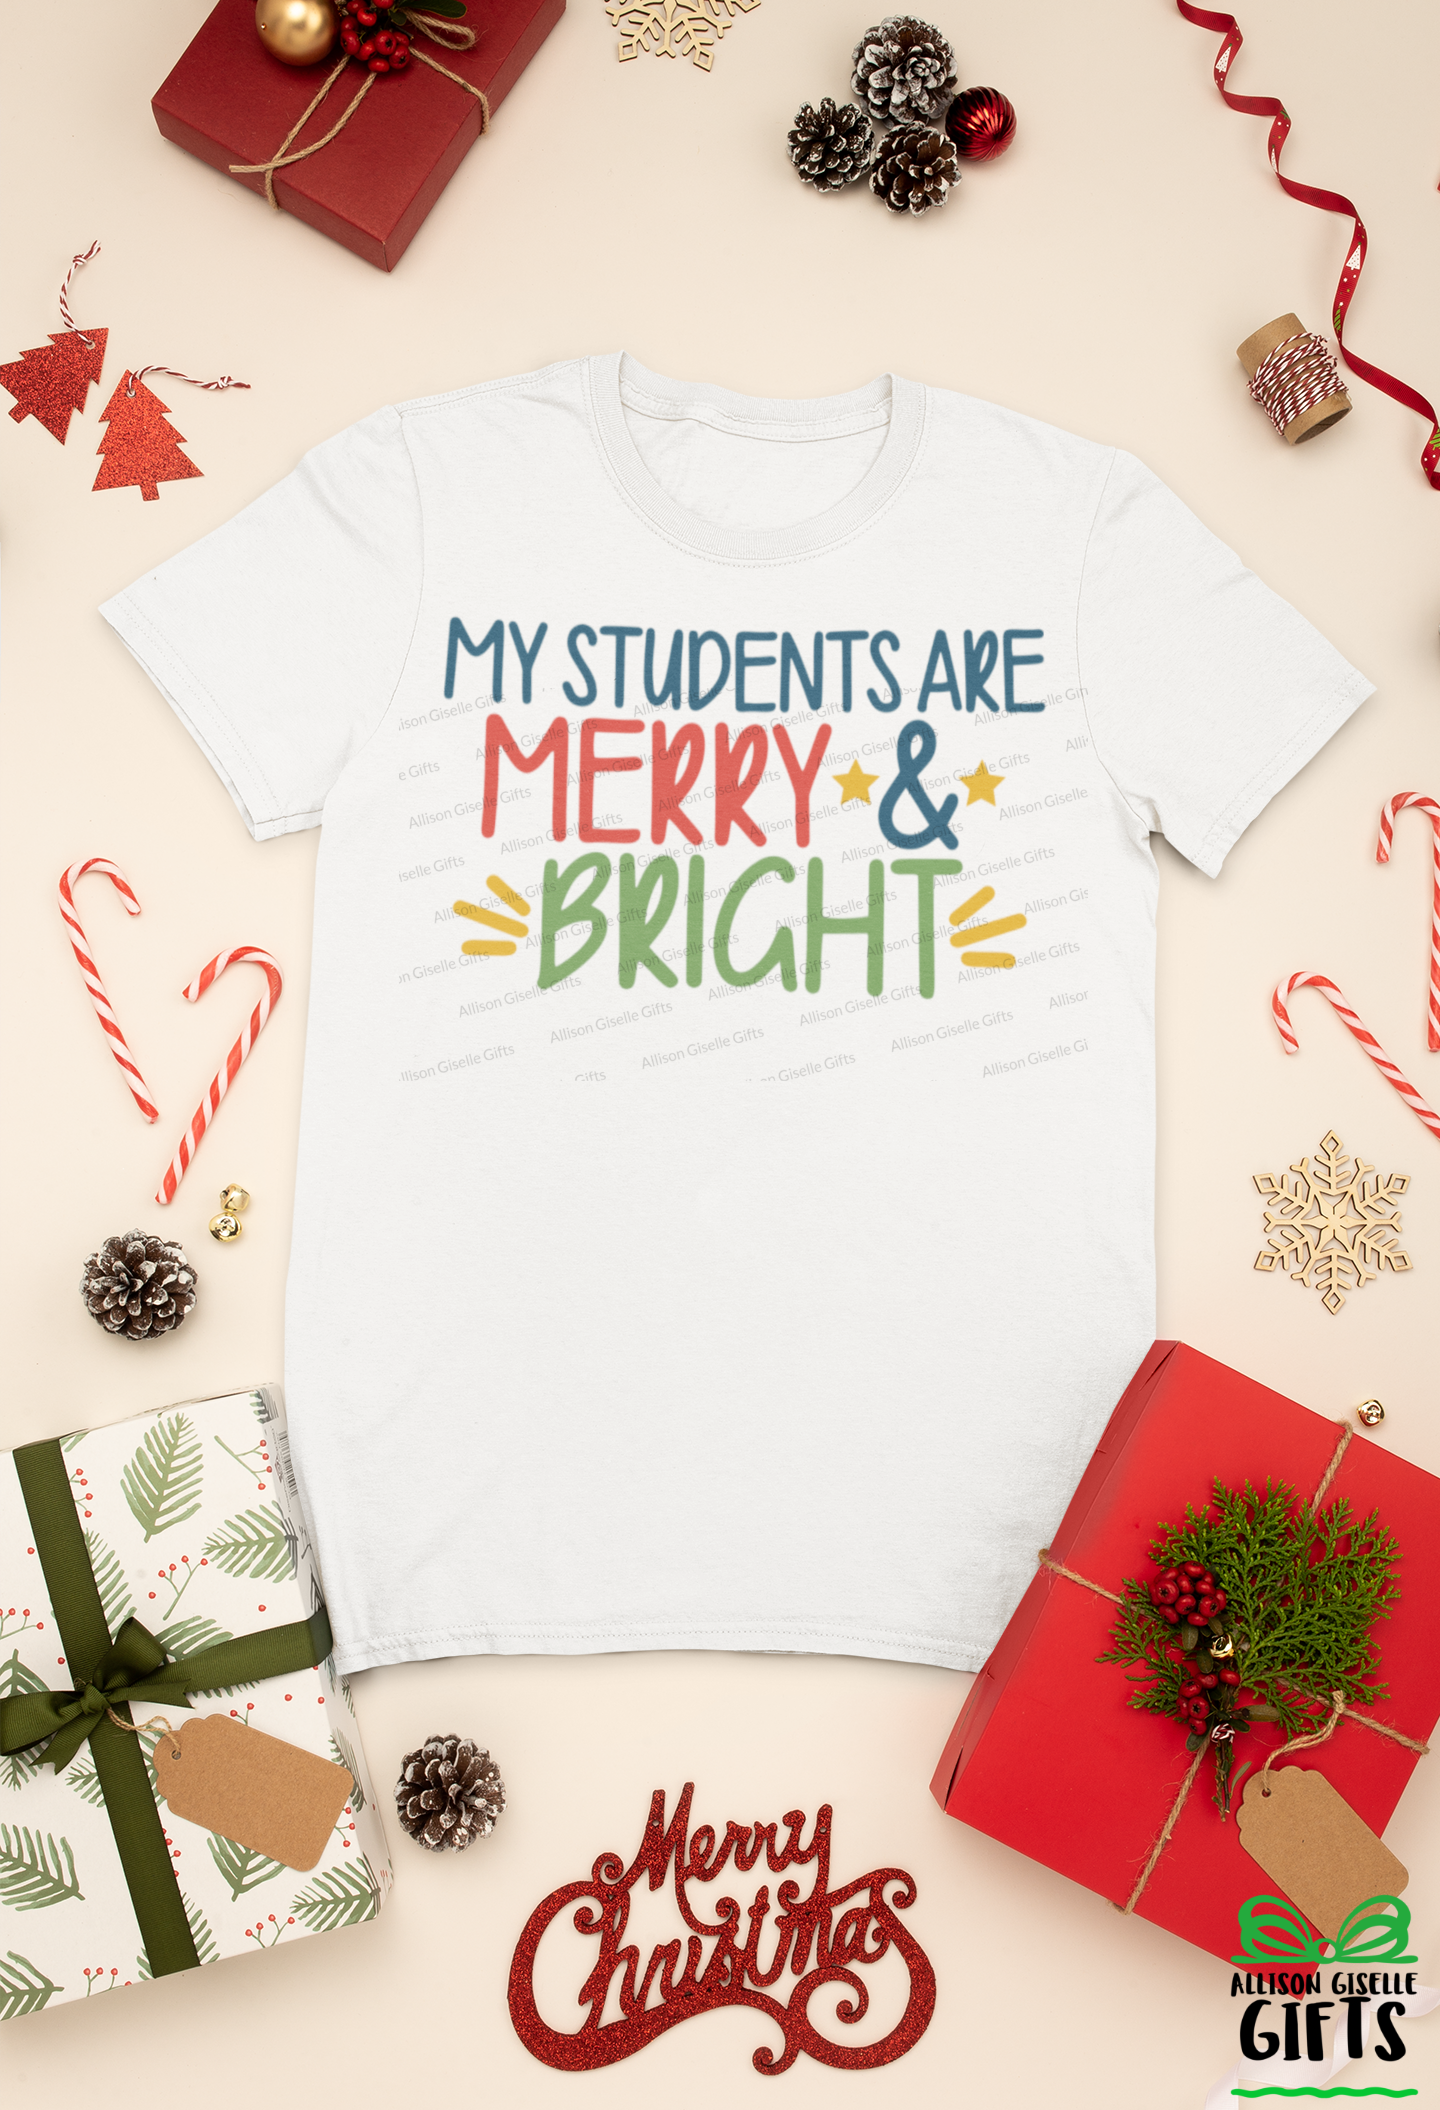 My Students Are Merry & Bright Shirt, Christmas Shirt, Christmas Shirt, Holiday T Shirt, Teacher Christmas Gift